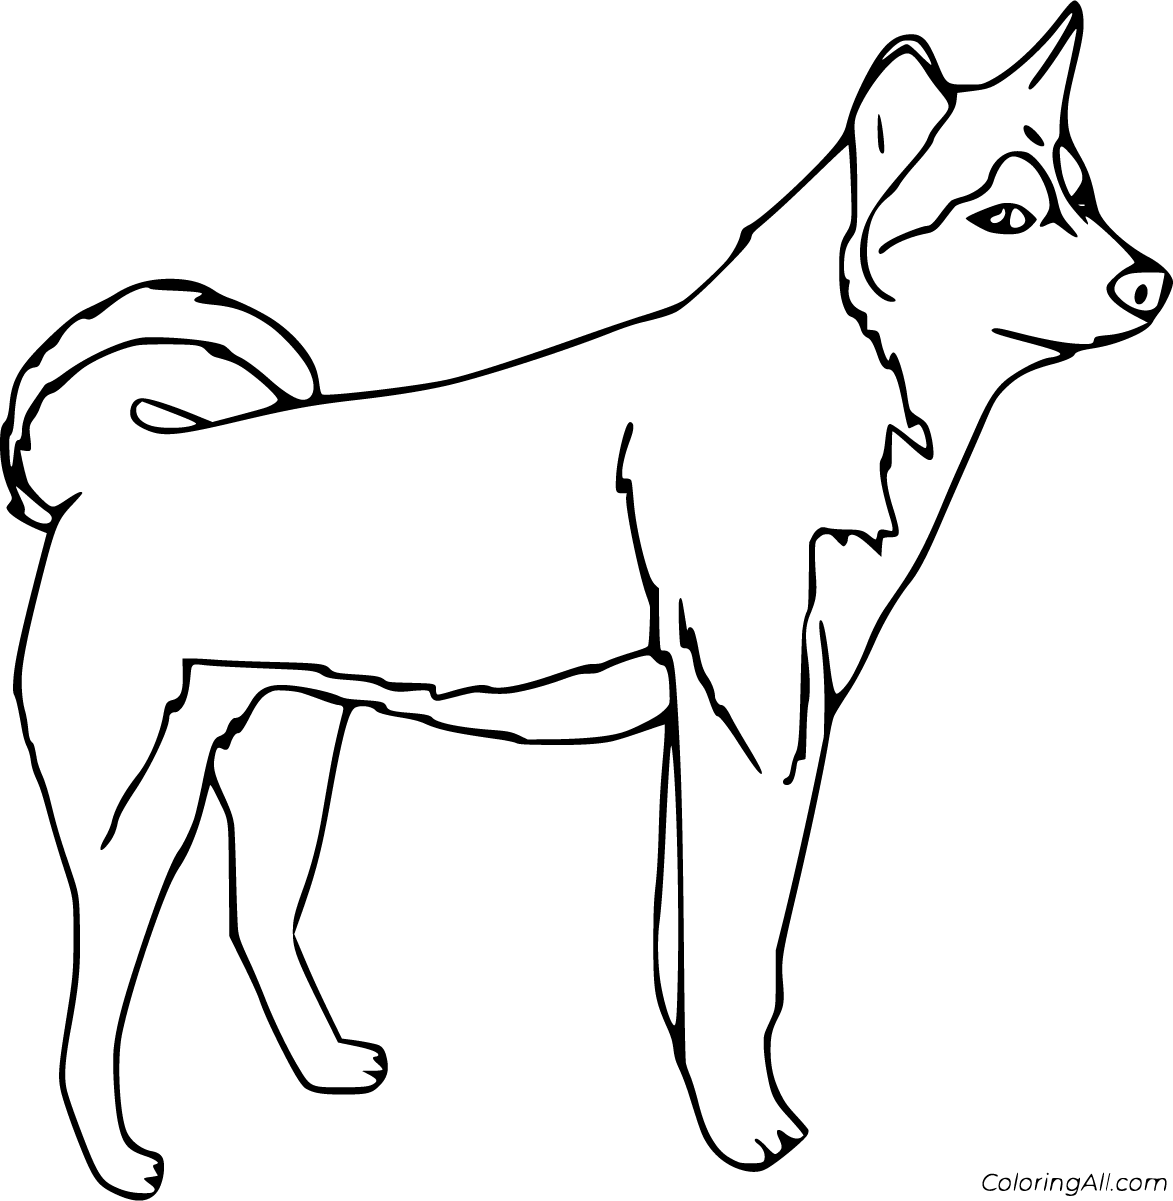 Husky coloring pages